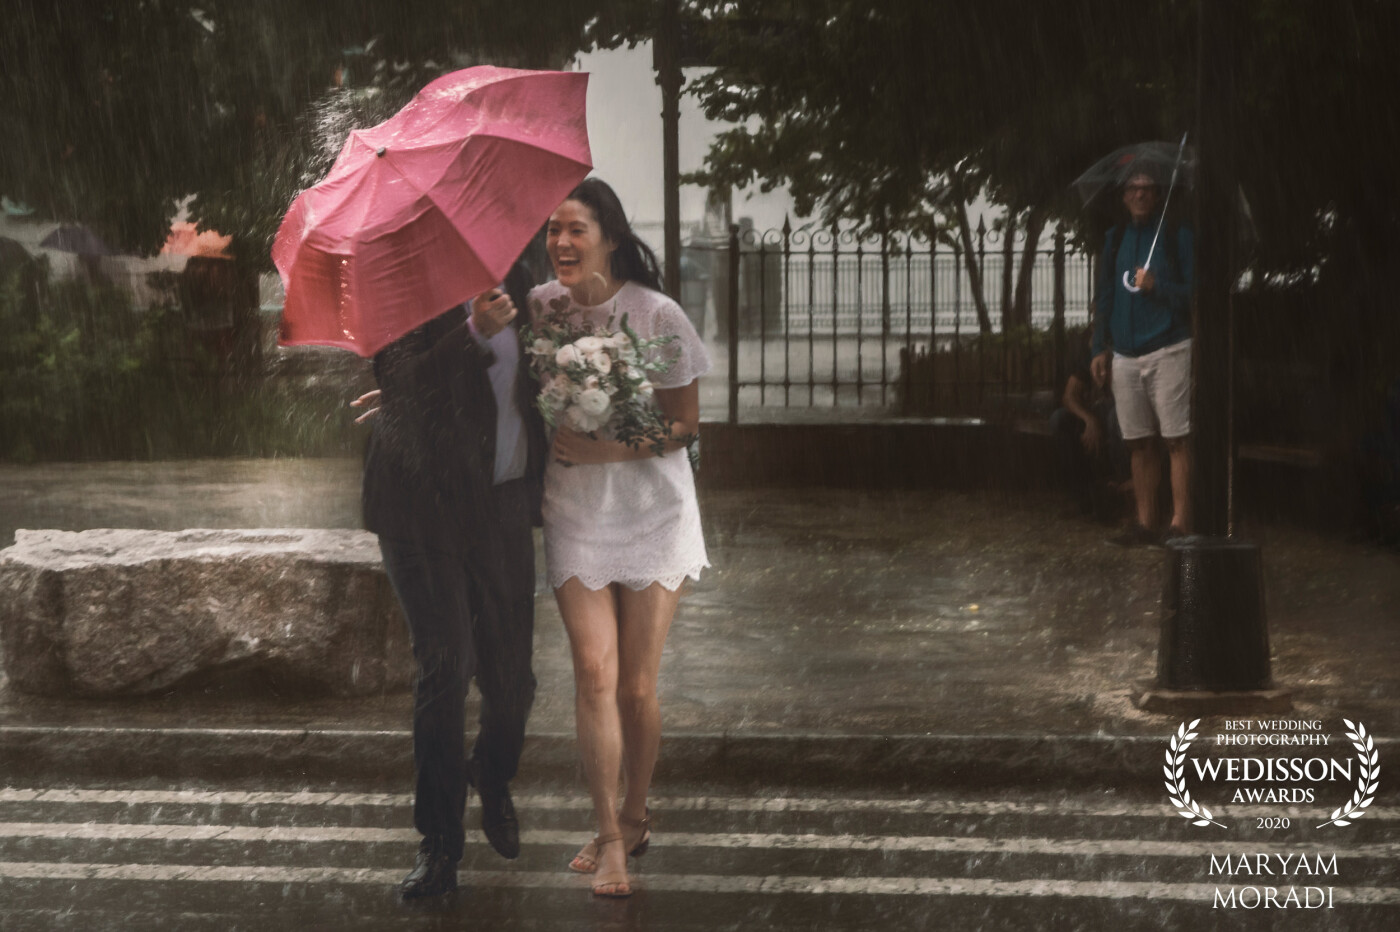 Love, Joy, and Rain Drops ... My gorgeous bride with her handsome groom enjoying the first moments of their marriage in harsh rainy weather at Brooklyn Bridge Park in New York City<br />
@marymor_photography<br />
New York City, US